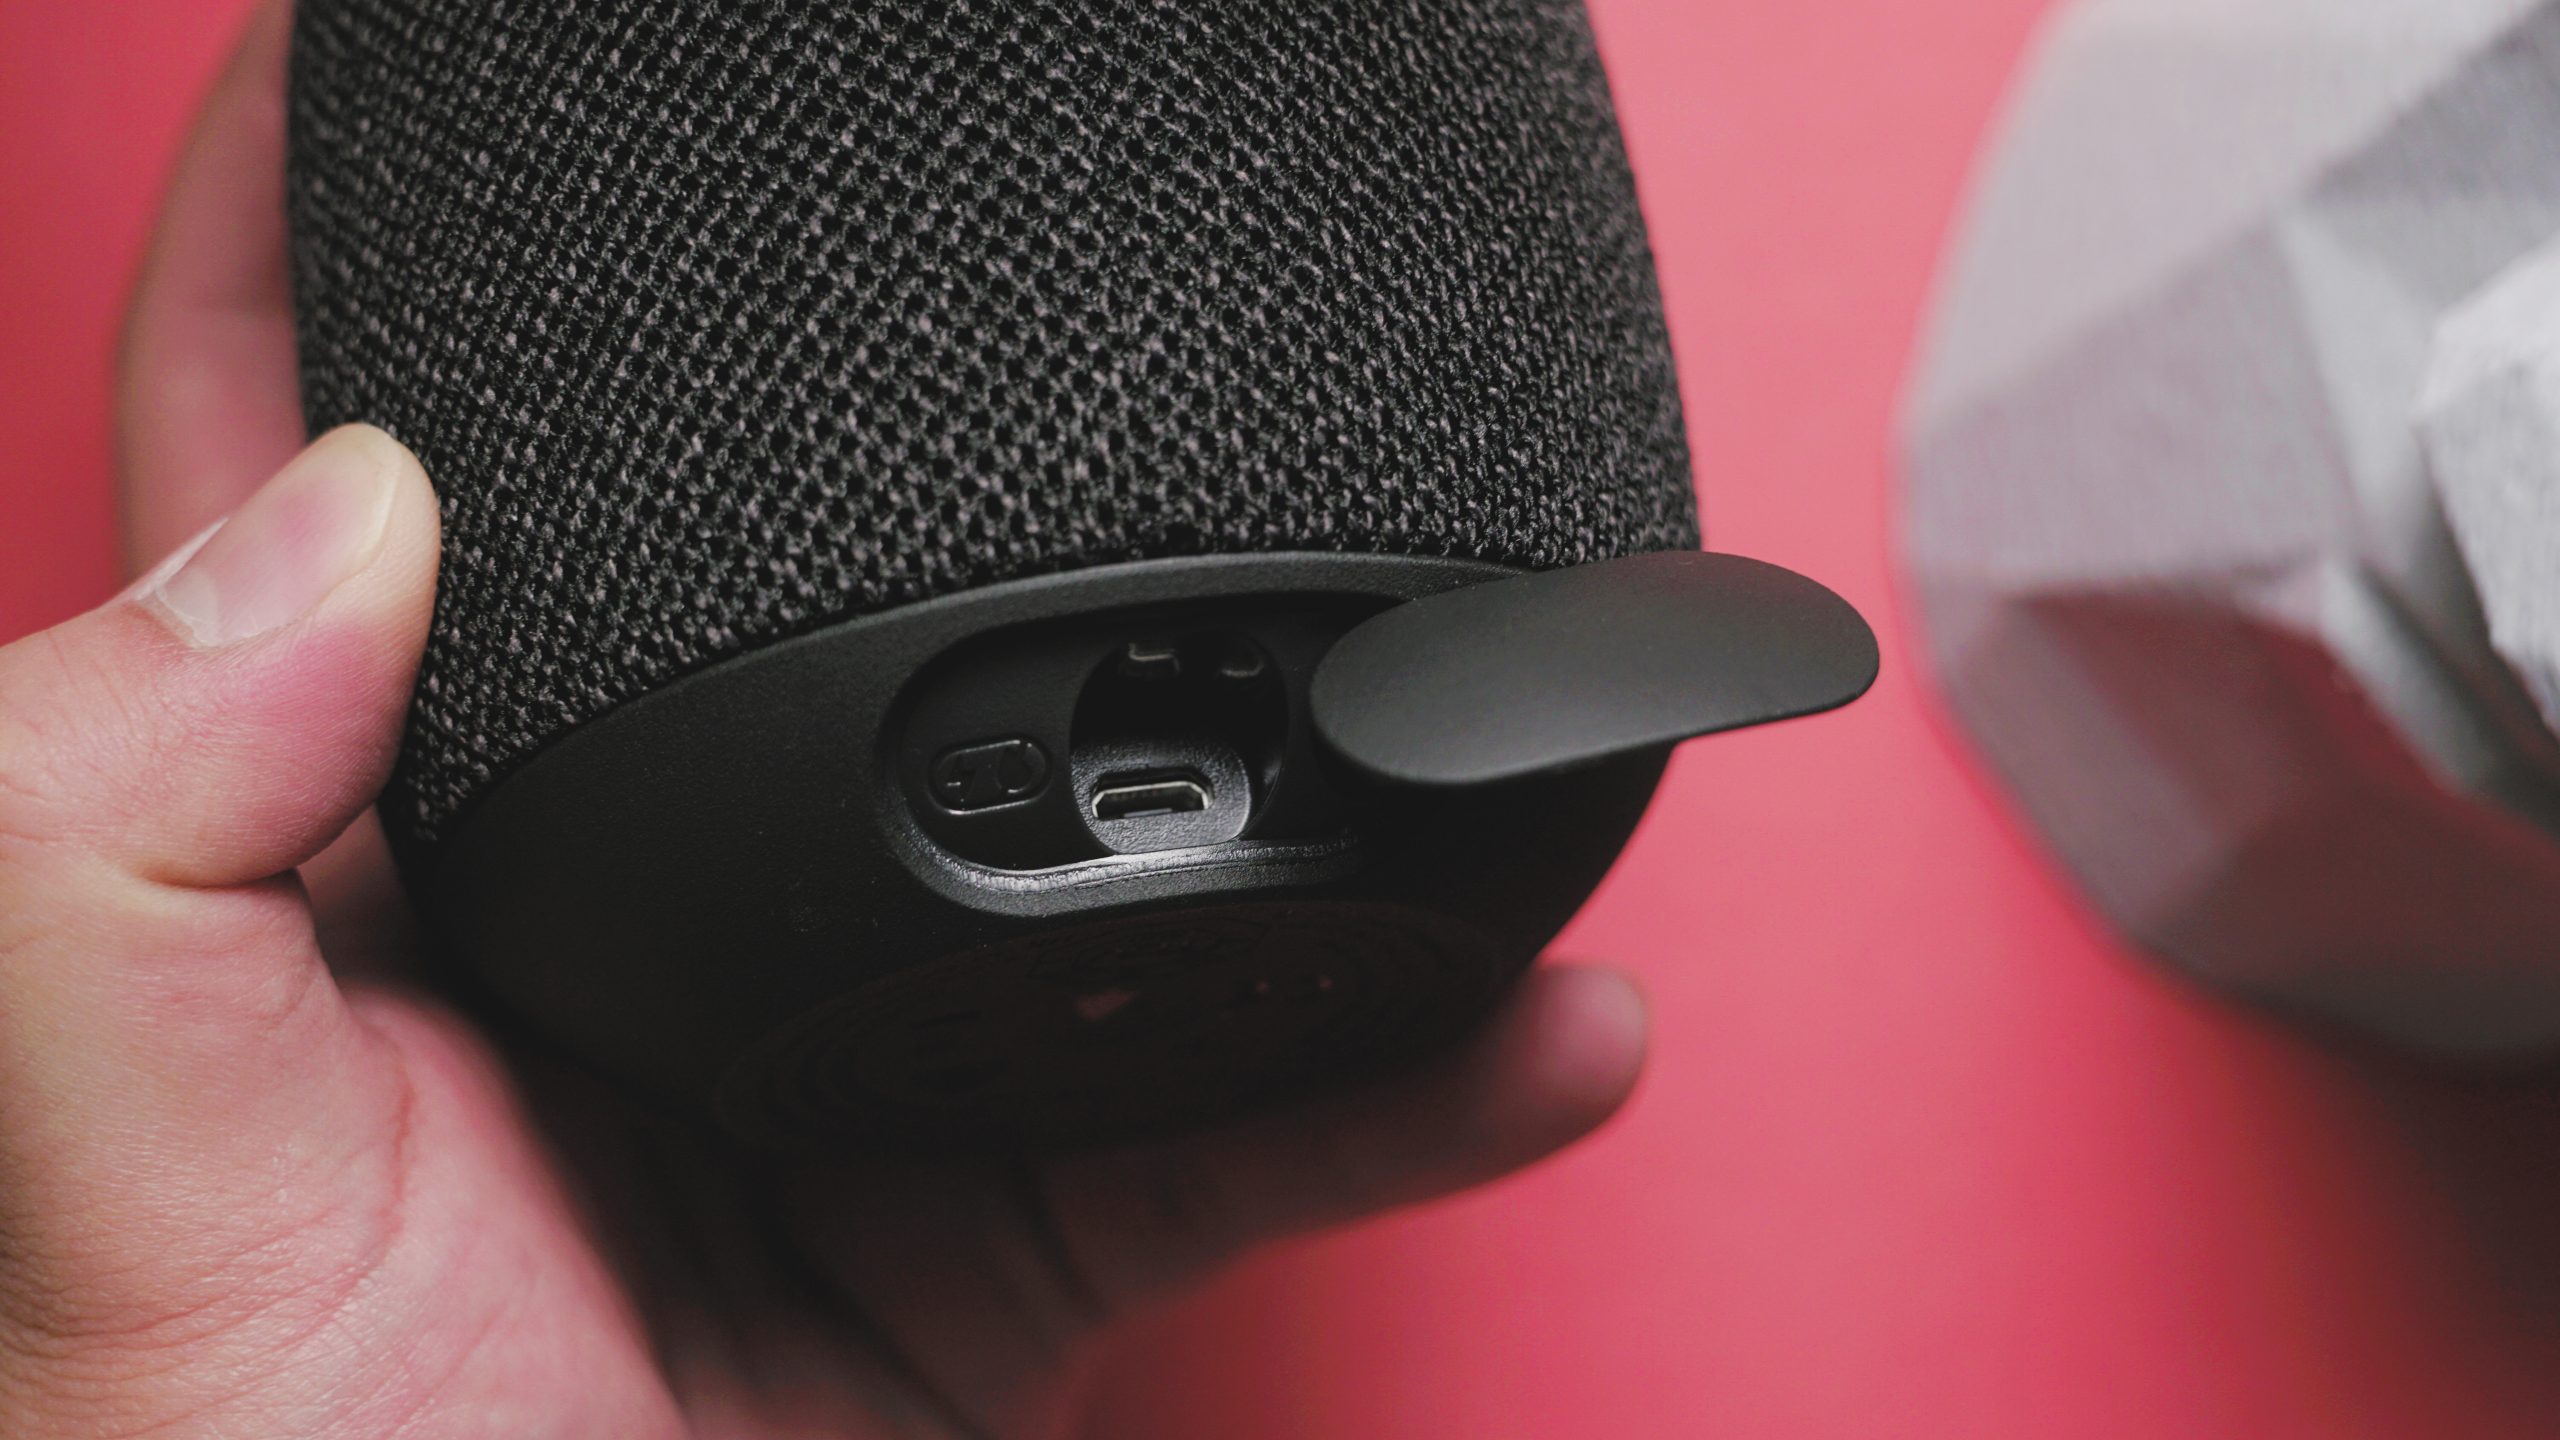 The Ultimate Ears Wonderboom 3 with its charging port being shown.